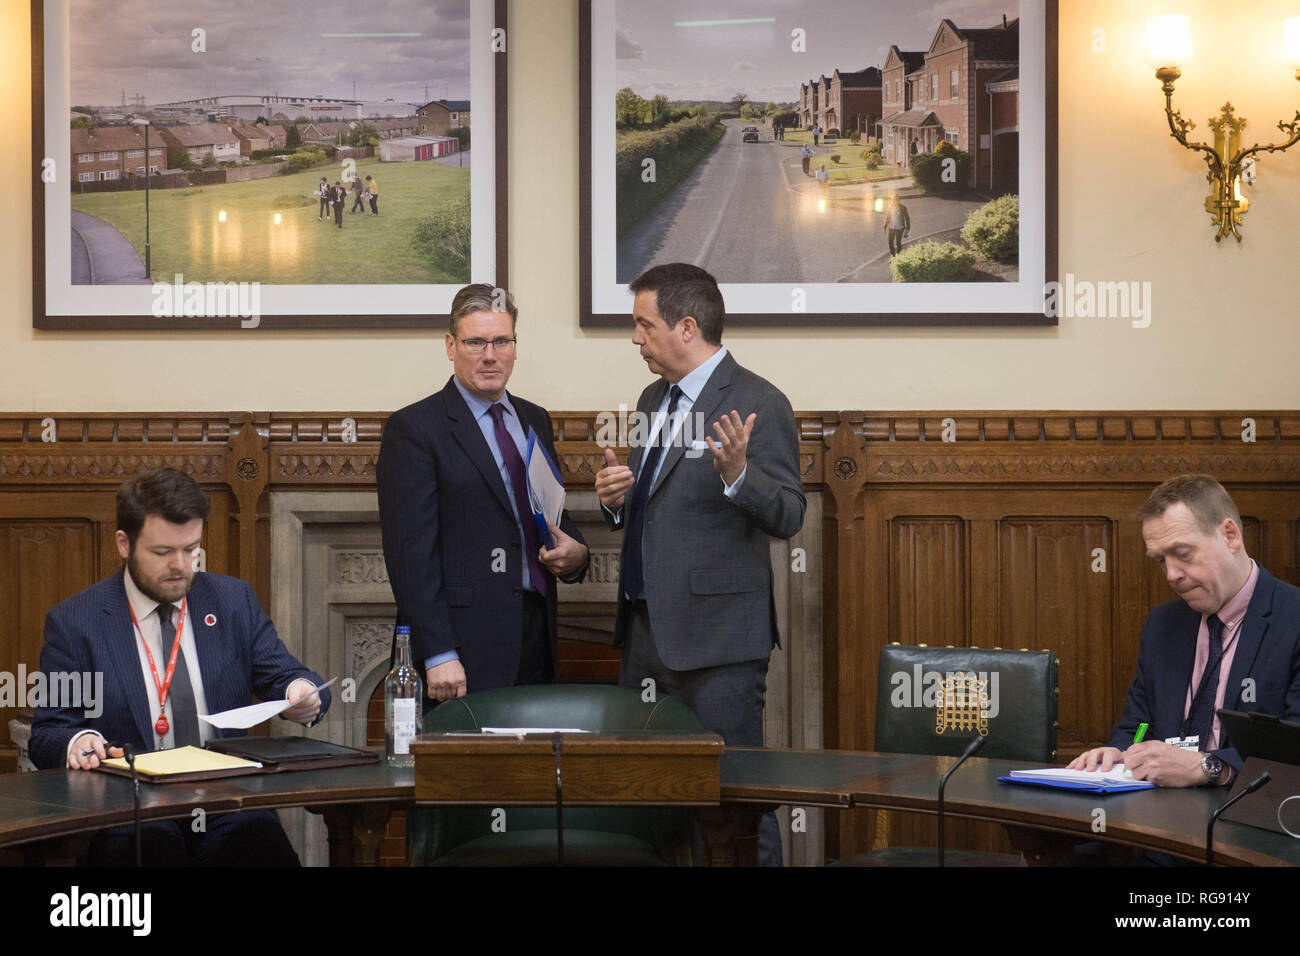 Shadow Brexit secretary Sir Keir Starmer (second left) meets (from left) Labour Party advisor Ruaidhri O'Donnell, Glyn Roberts of Retail NI and Geoff Nuttall of the NI Council for Voluntary Action at the House of Commons as representatives of Northern Ireland's business, farming, trade union, community and voluntary sectors visit Westminster to press for a Brexit deal. Stock Photo